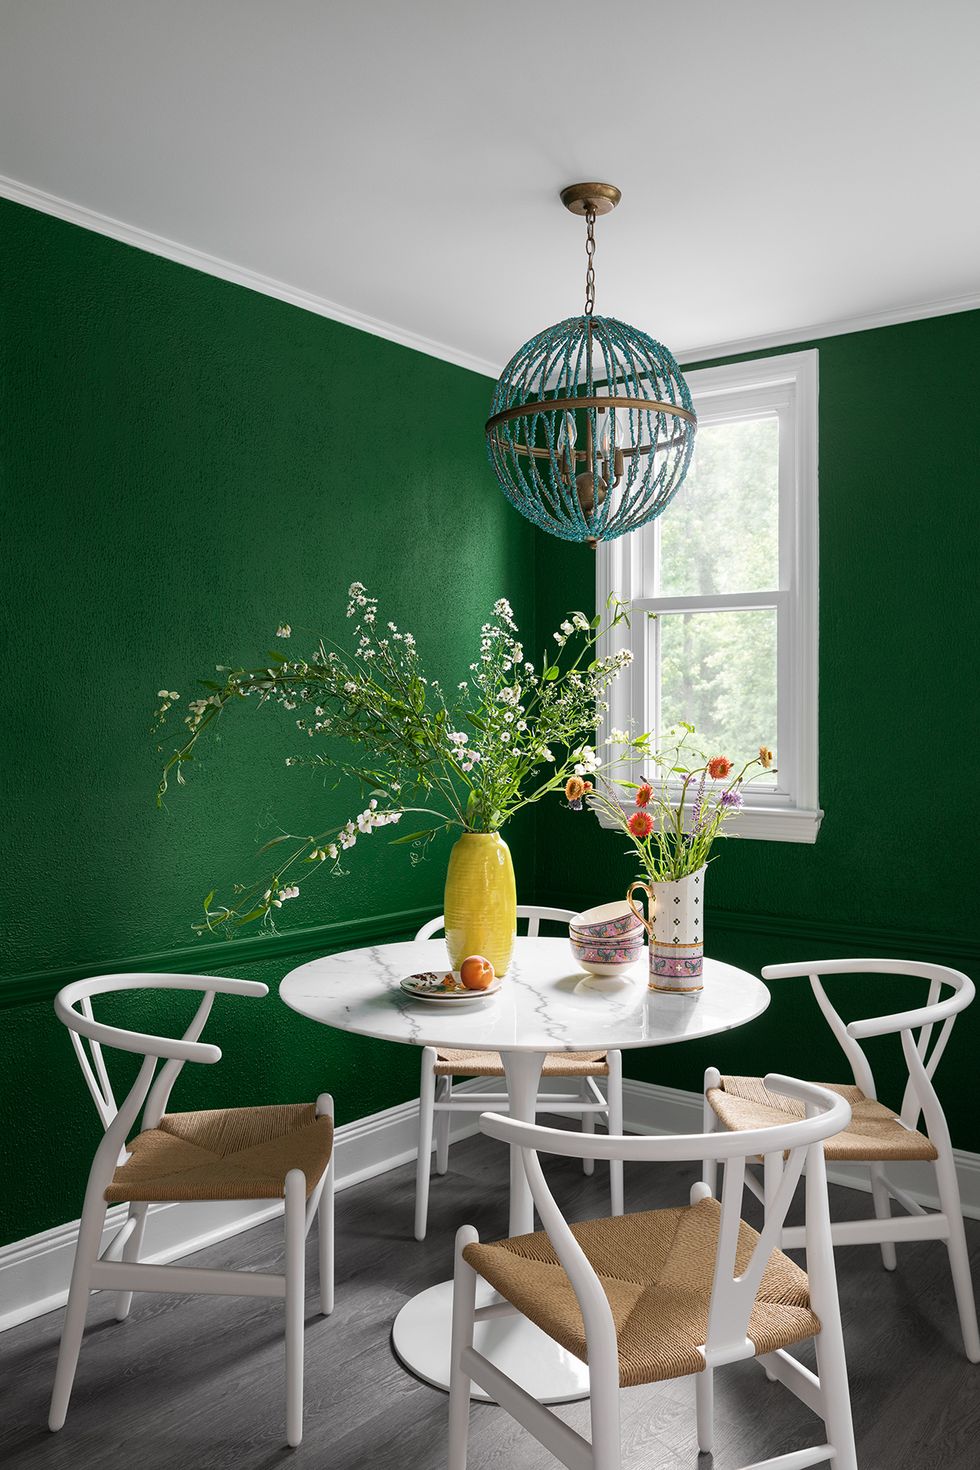 Our Interior Paint Colors - A Thoughtful Place